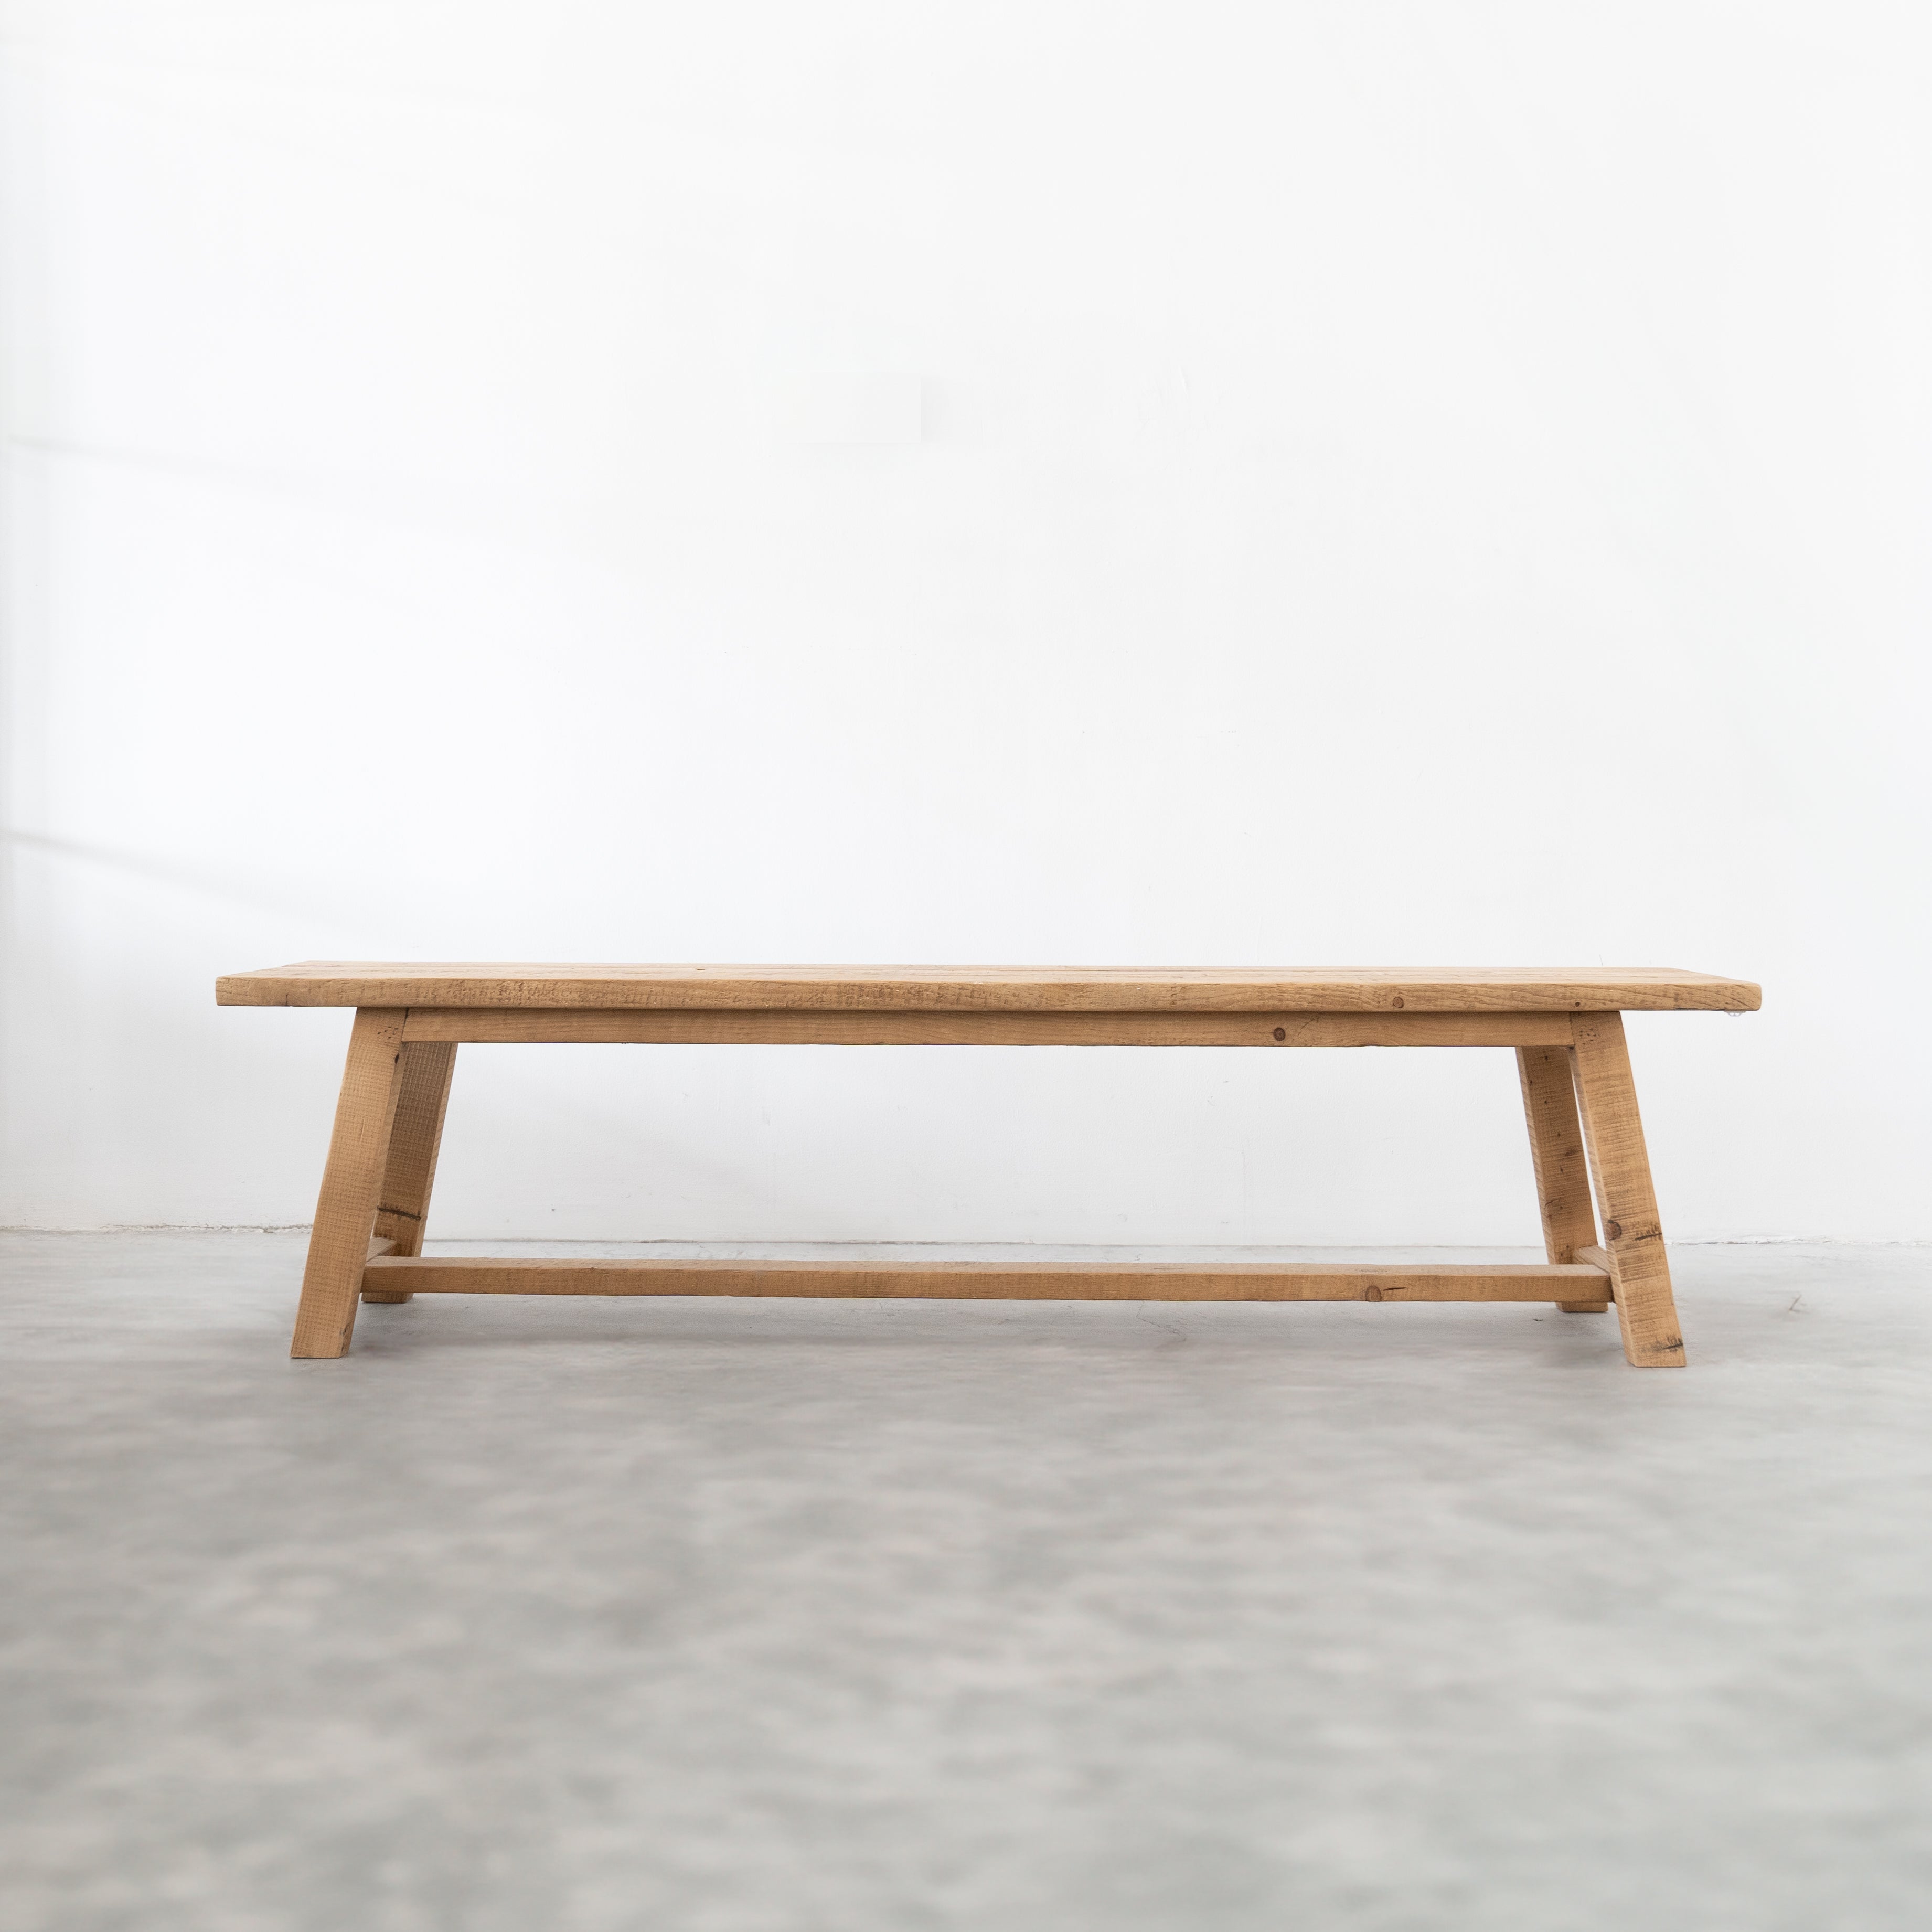 Wooden Bench - Wood and Steel Furnitures